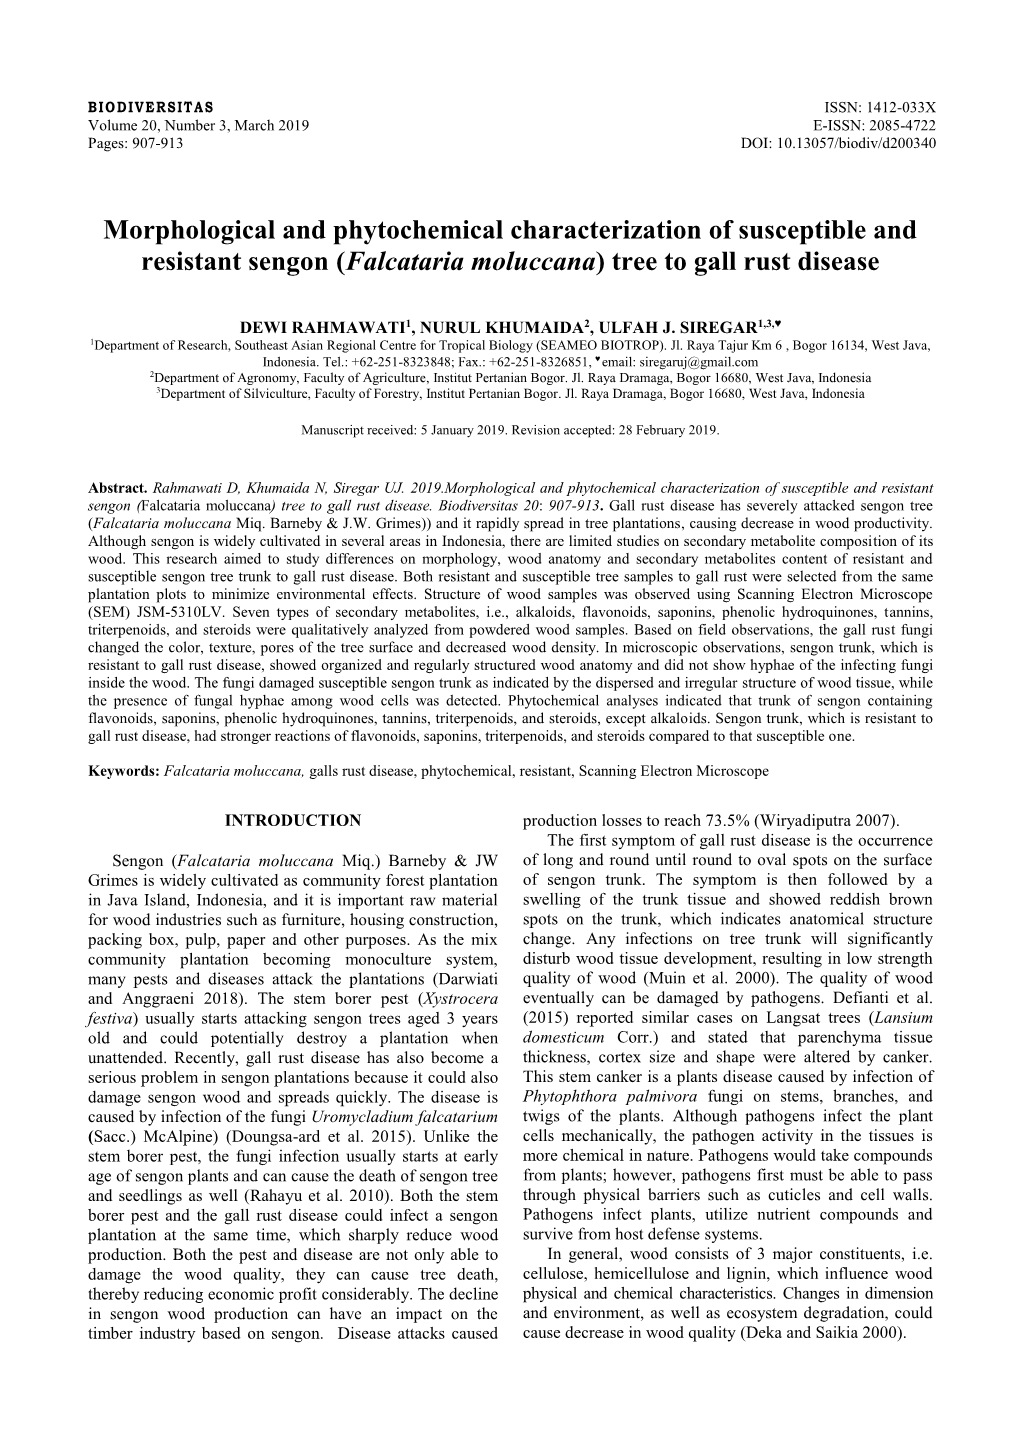 Morphological and Phytochemical Characterization of Susceptible and Resistant Sengon (Falcataria Moluccana) Tree to Gall Rust Disease